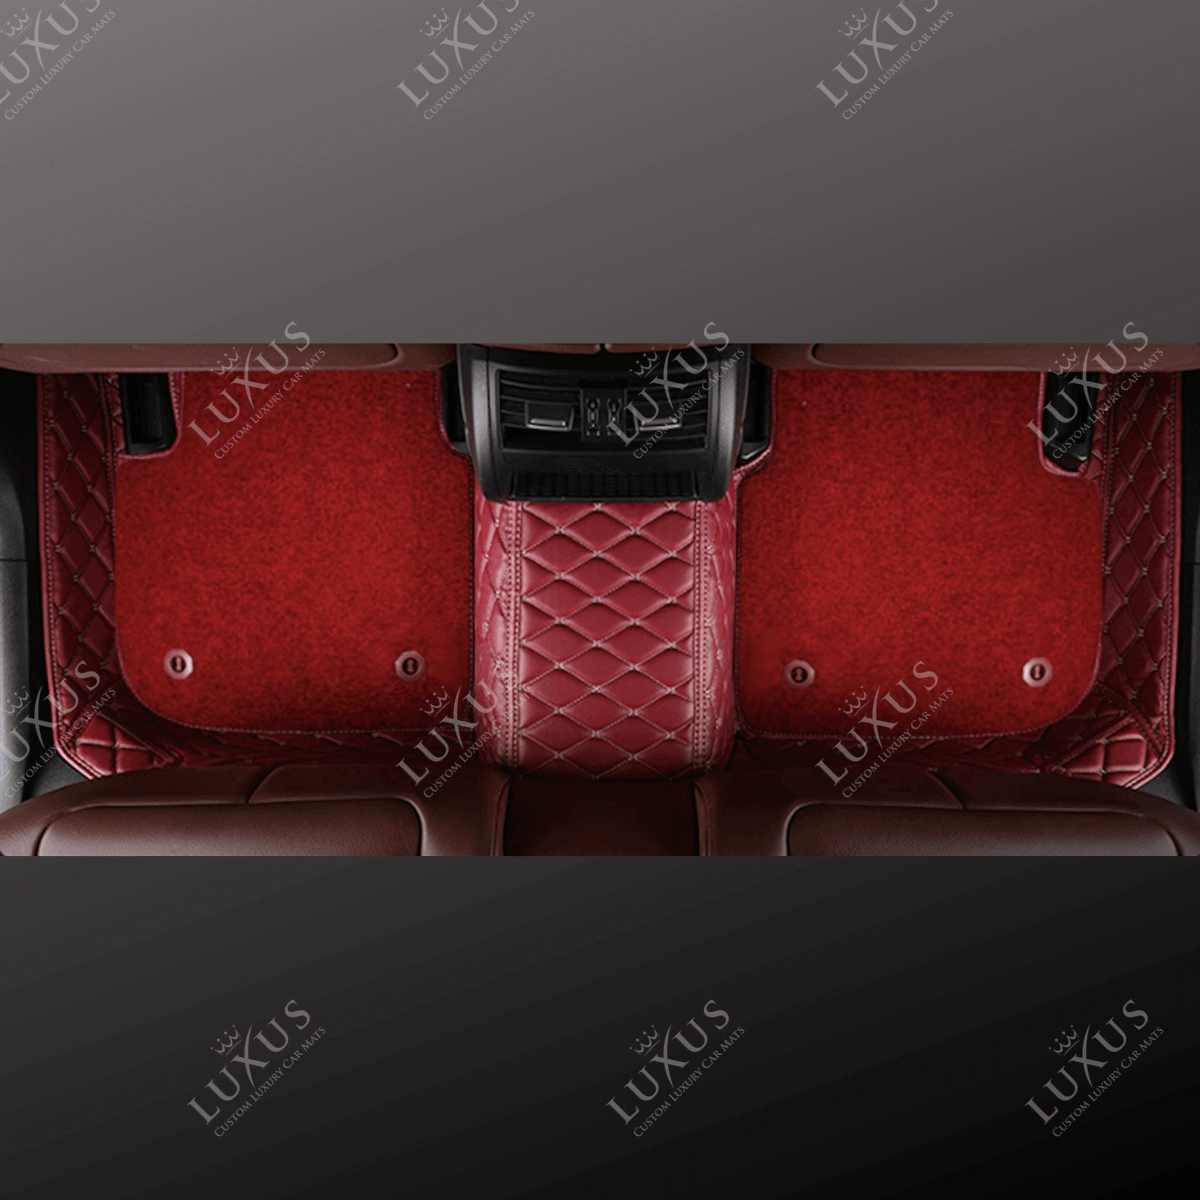 Cherry Red Diamond Base & Red Top Carpet Double Layer Luxury Car Mats Set